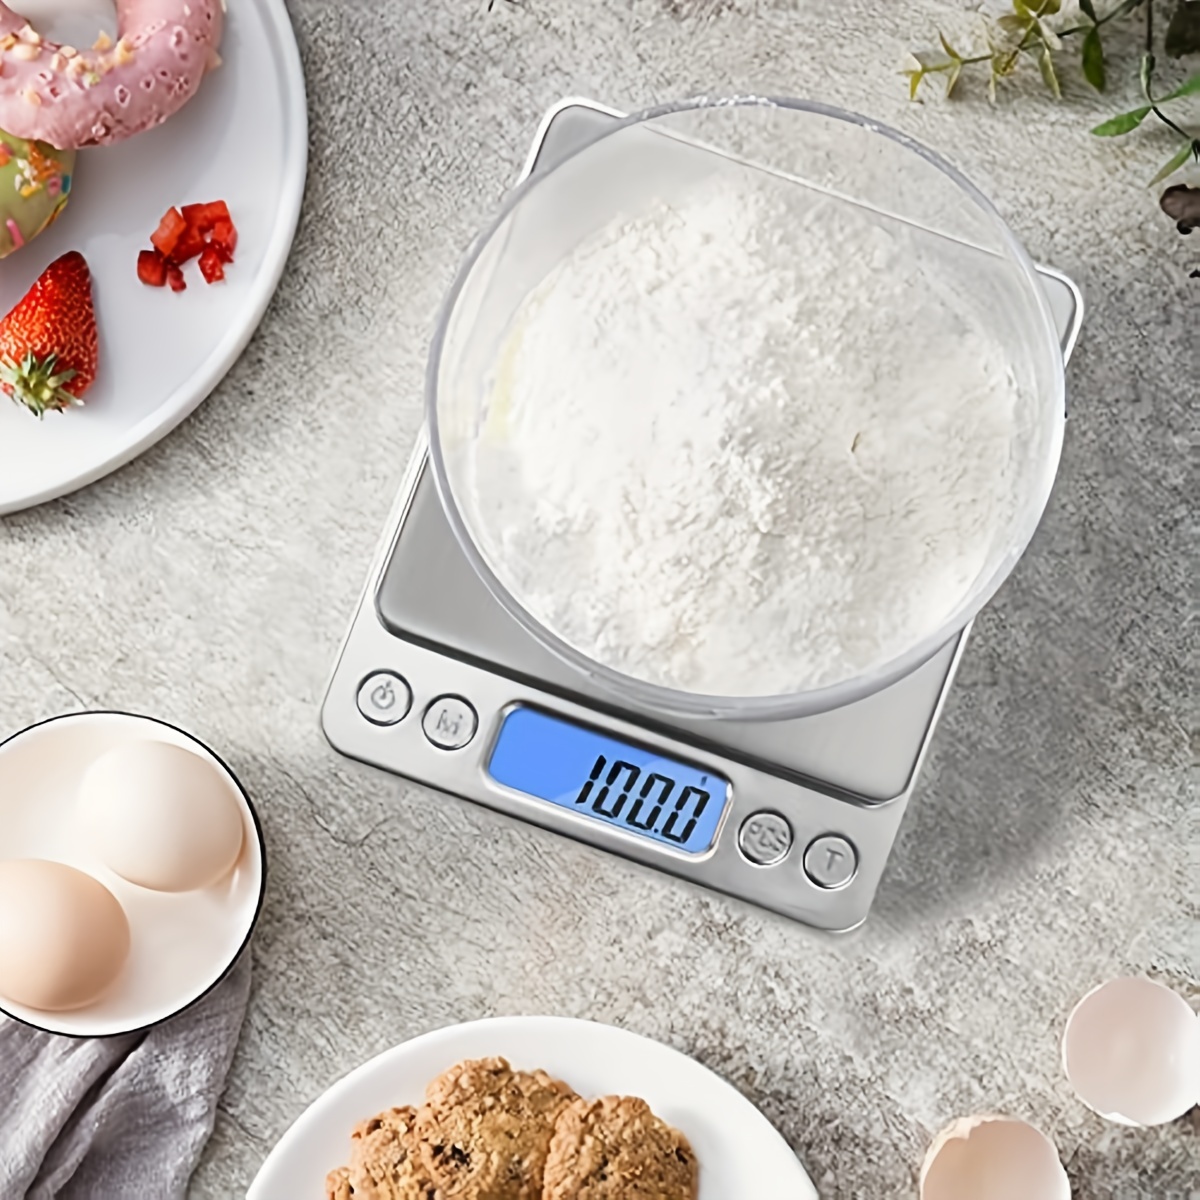 Goxawee Accurate Digital Pocket Scale, Electronic Mini Scale Gram And  Ounce, Small Food Scale With 6 Units, Stainless Steel Portable Kitchen Scale  With Lcd Display For Jewelry, Medicine, Food For Hotels,restaurant,stalls, food Trucks 